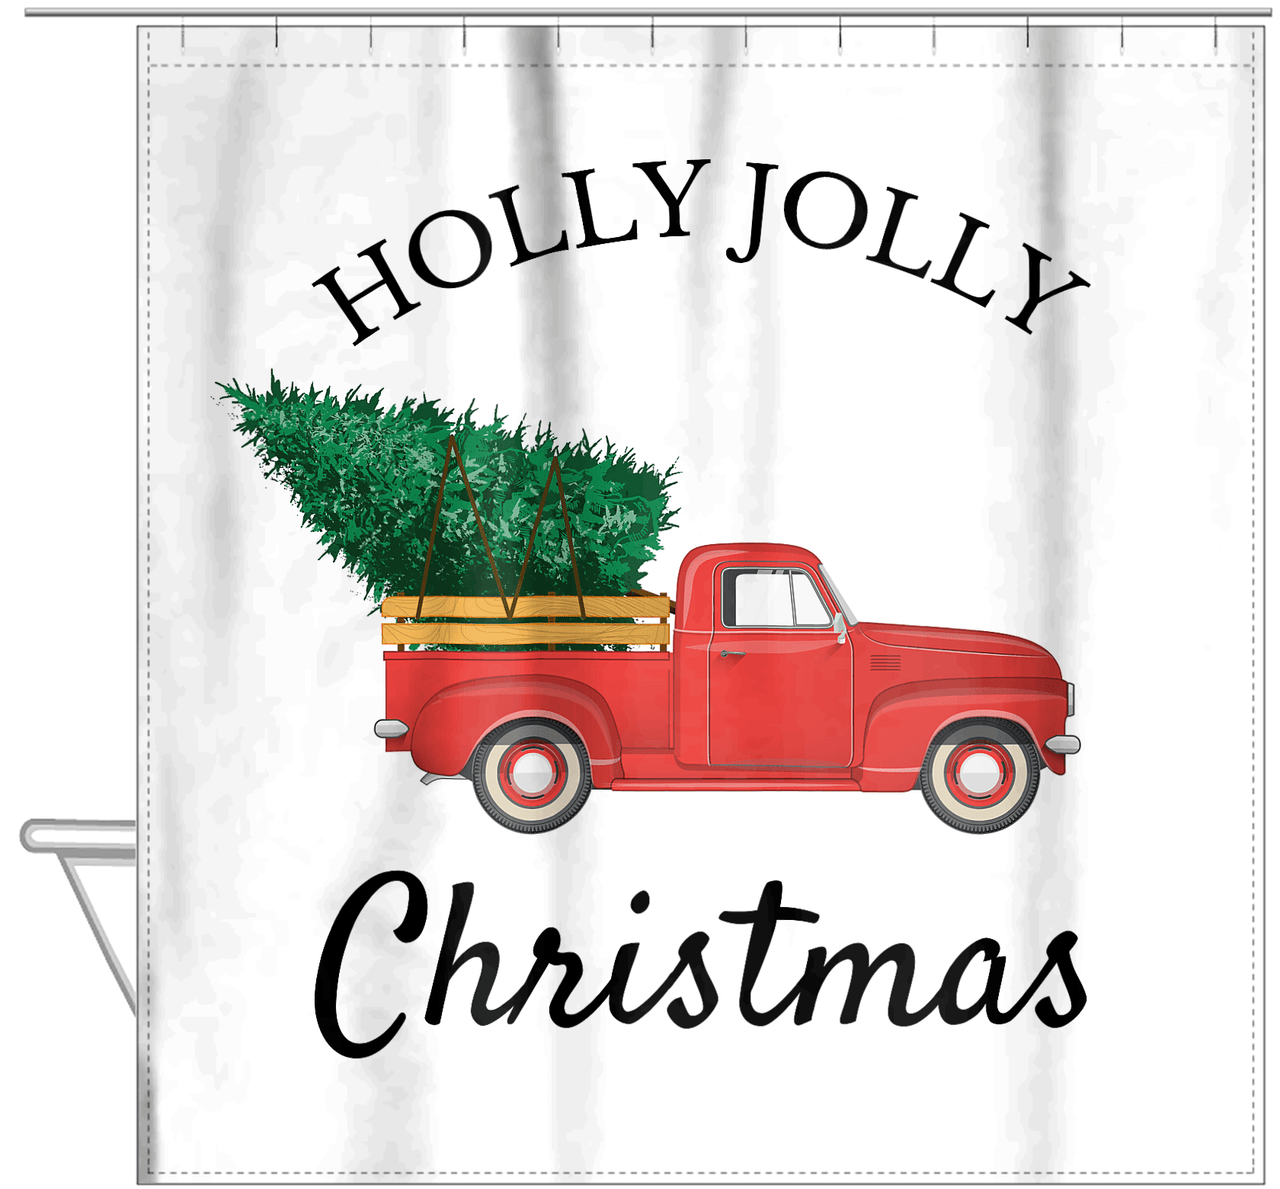 Personalized Christmas Shower Curtain - Old Red Truck with Christmas Tree with Arc Text - Hanging View